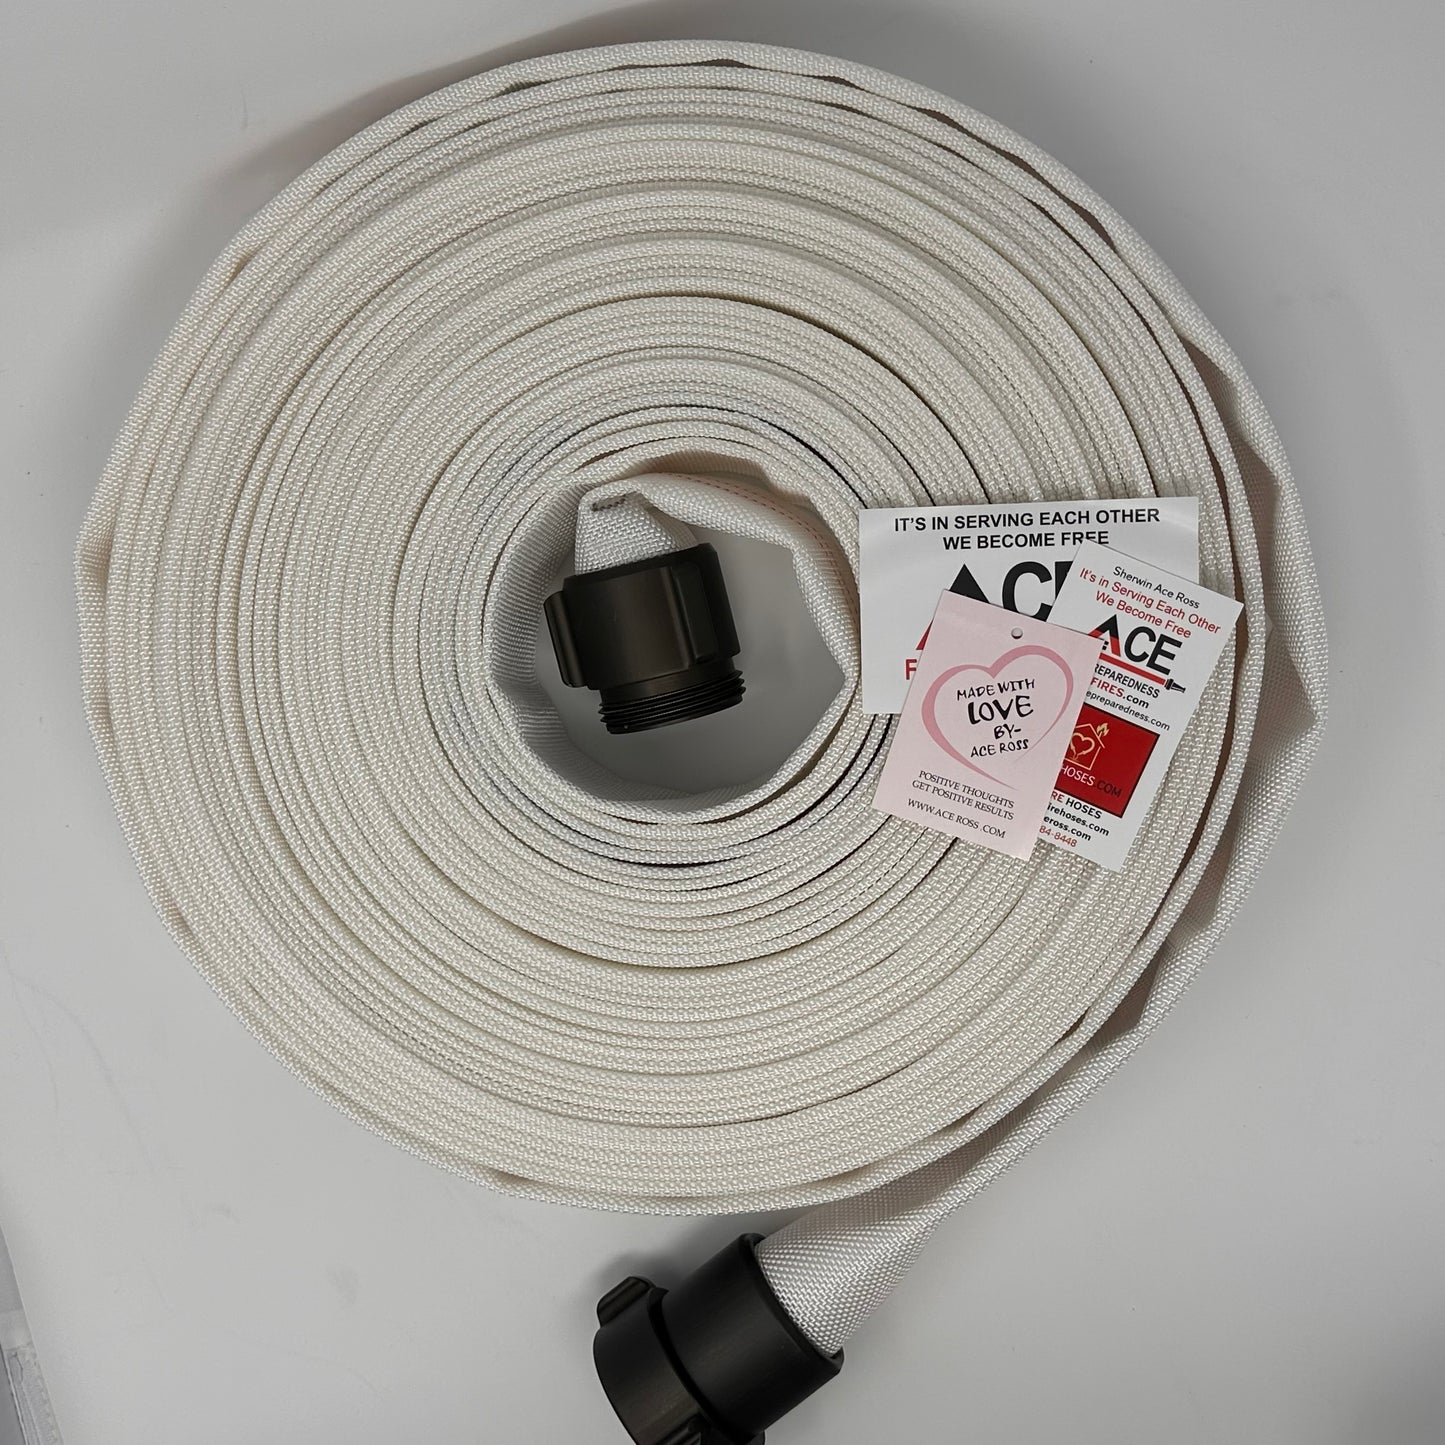 Professional Fire Hose 75’ x 1.5”, Folded or Coiled, NH /NST Aluminum Couplings, TPU Lining, FM Approved for occupant use.